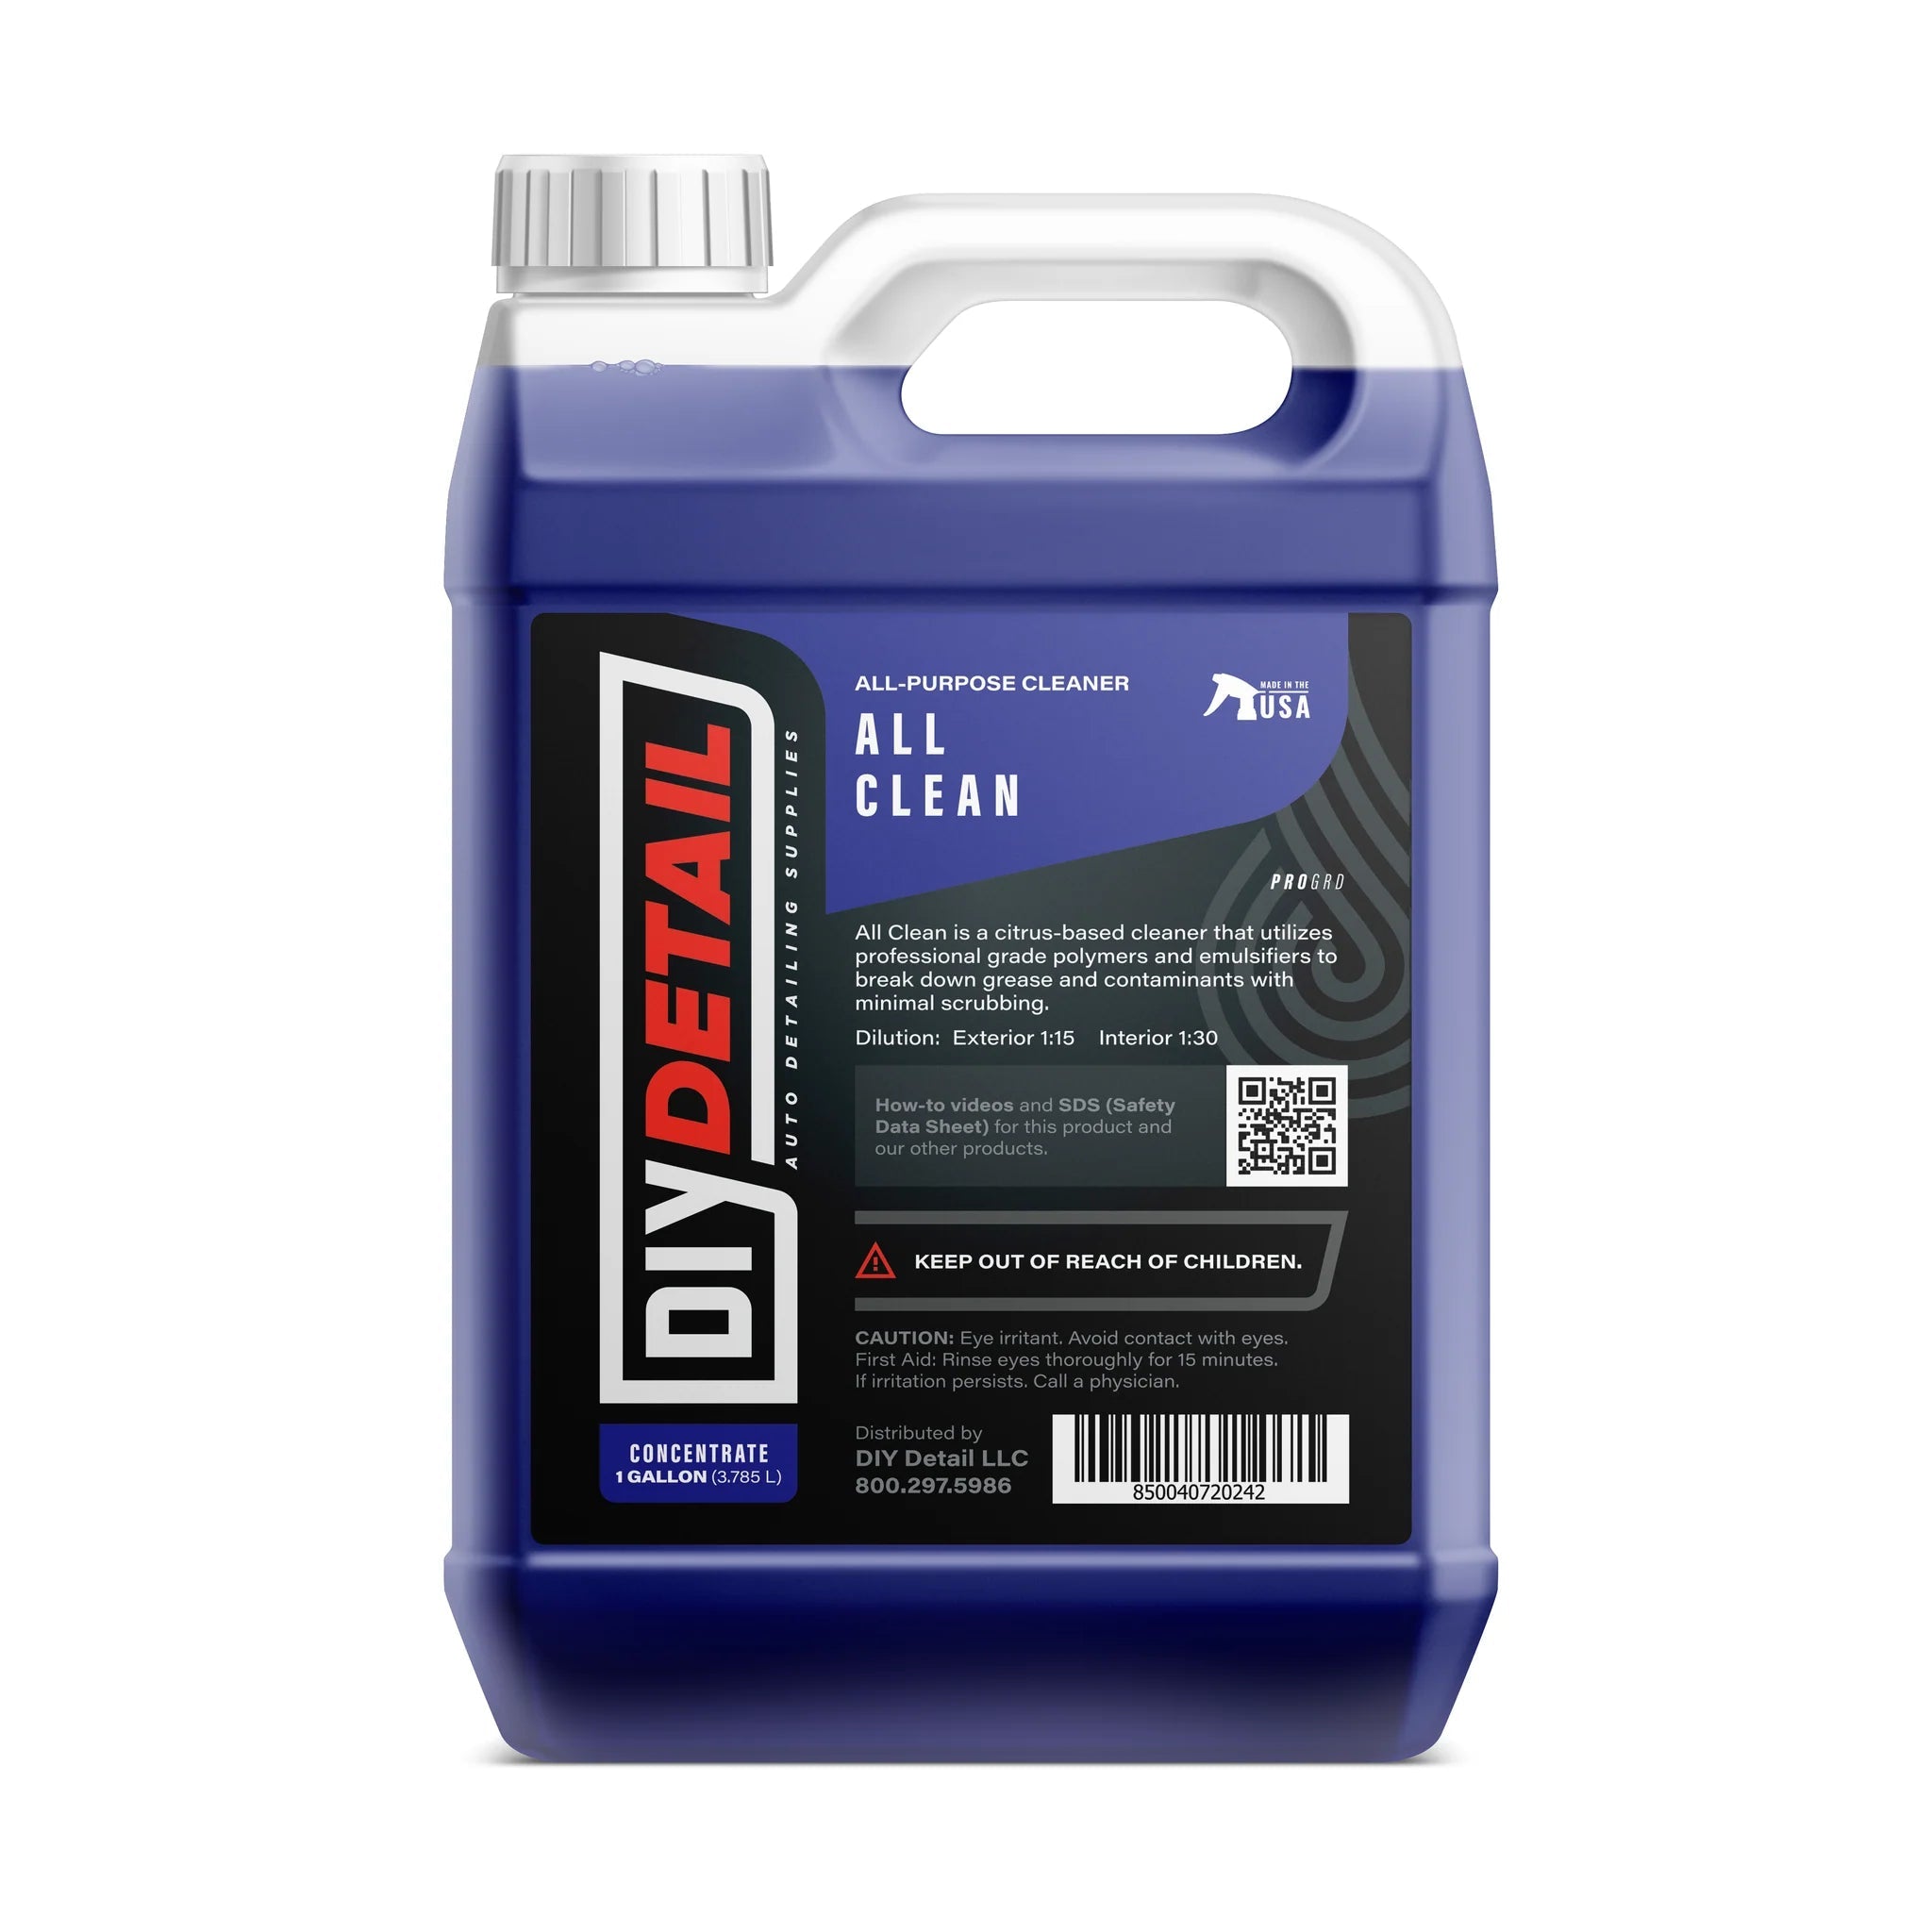 CITRUS ALL PURPOSE CLEANER. Professional Detailing Products